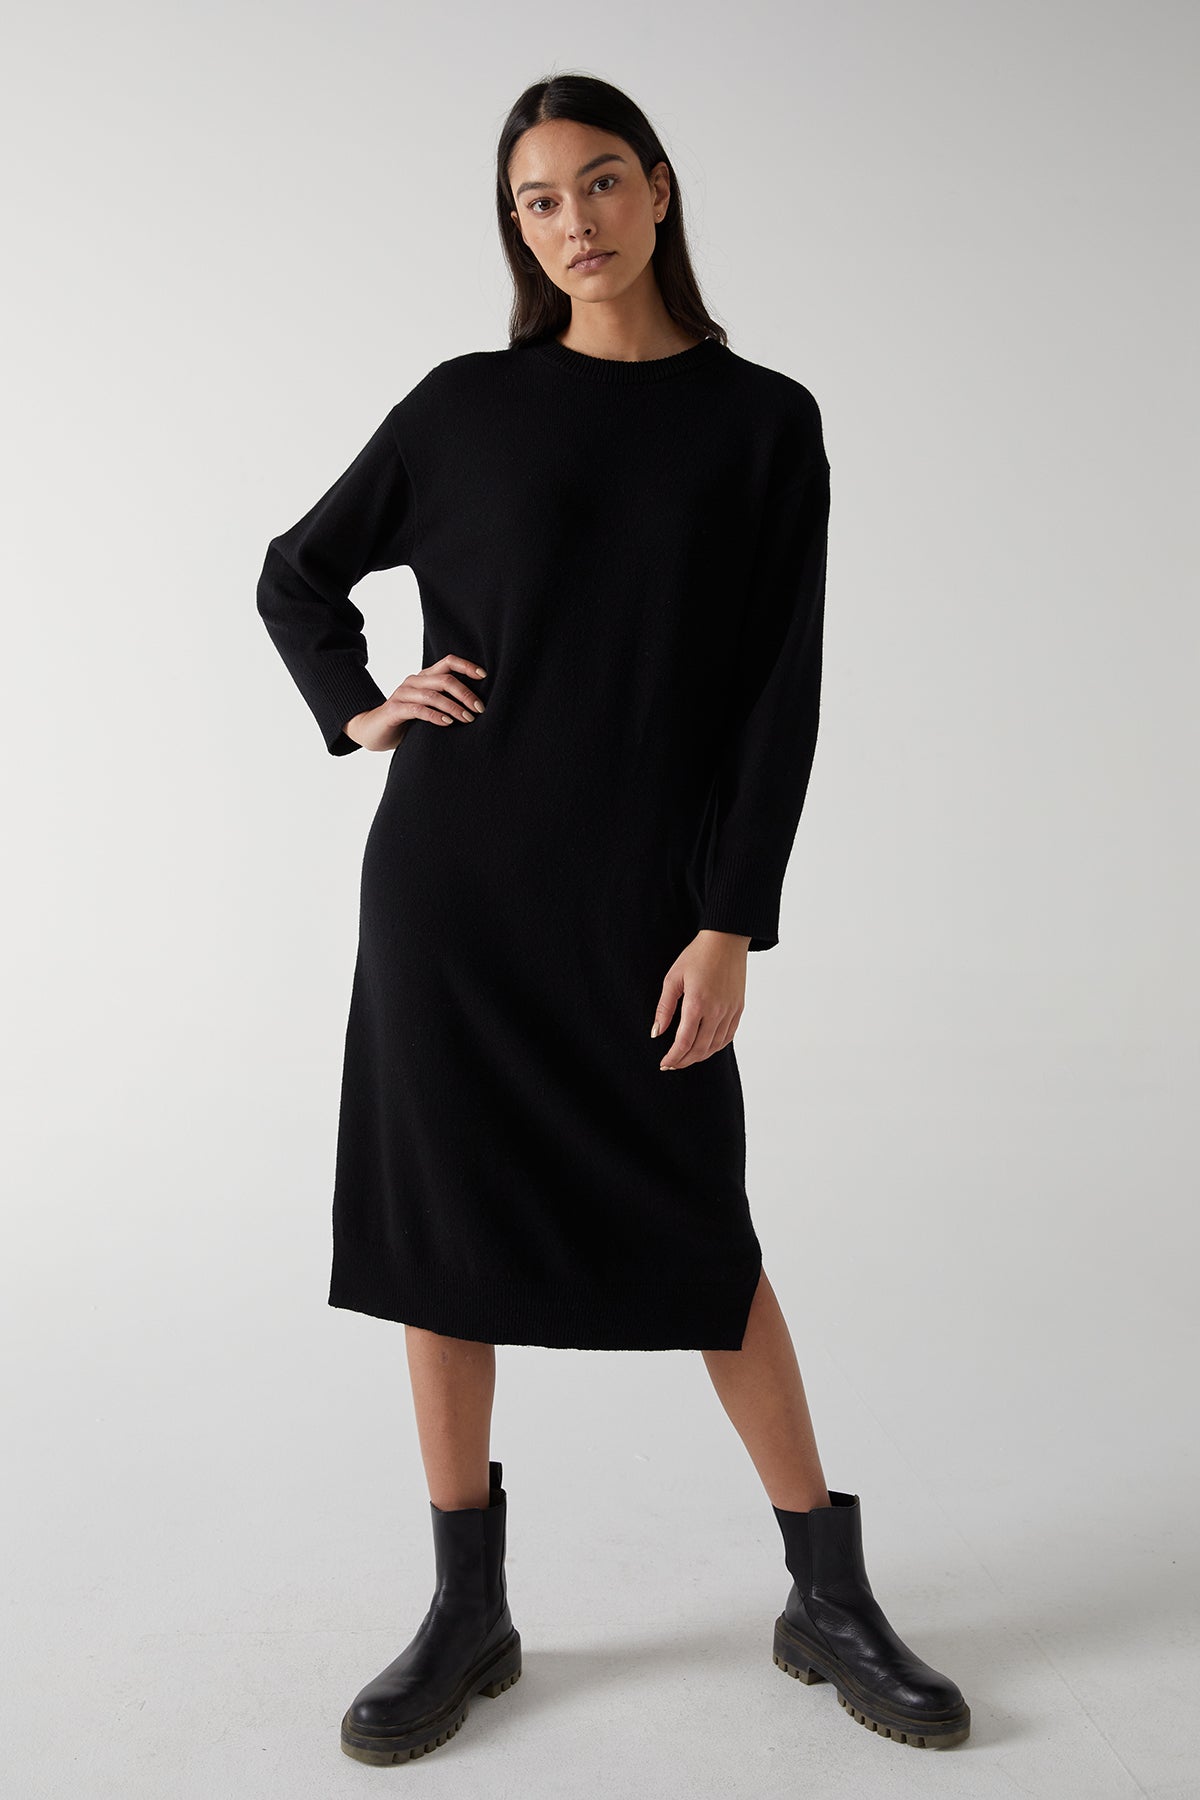 The Velvet by Jenny Graham LAUREL DRESS features a minimal silhouette and side hem slits.-25315829317825